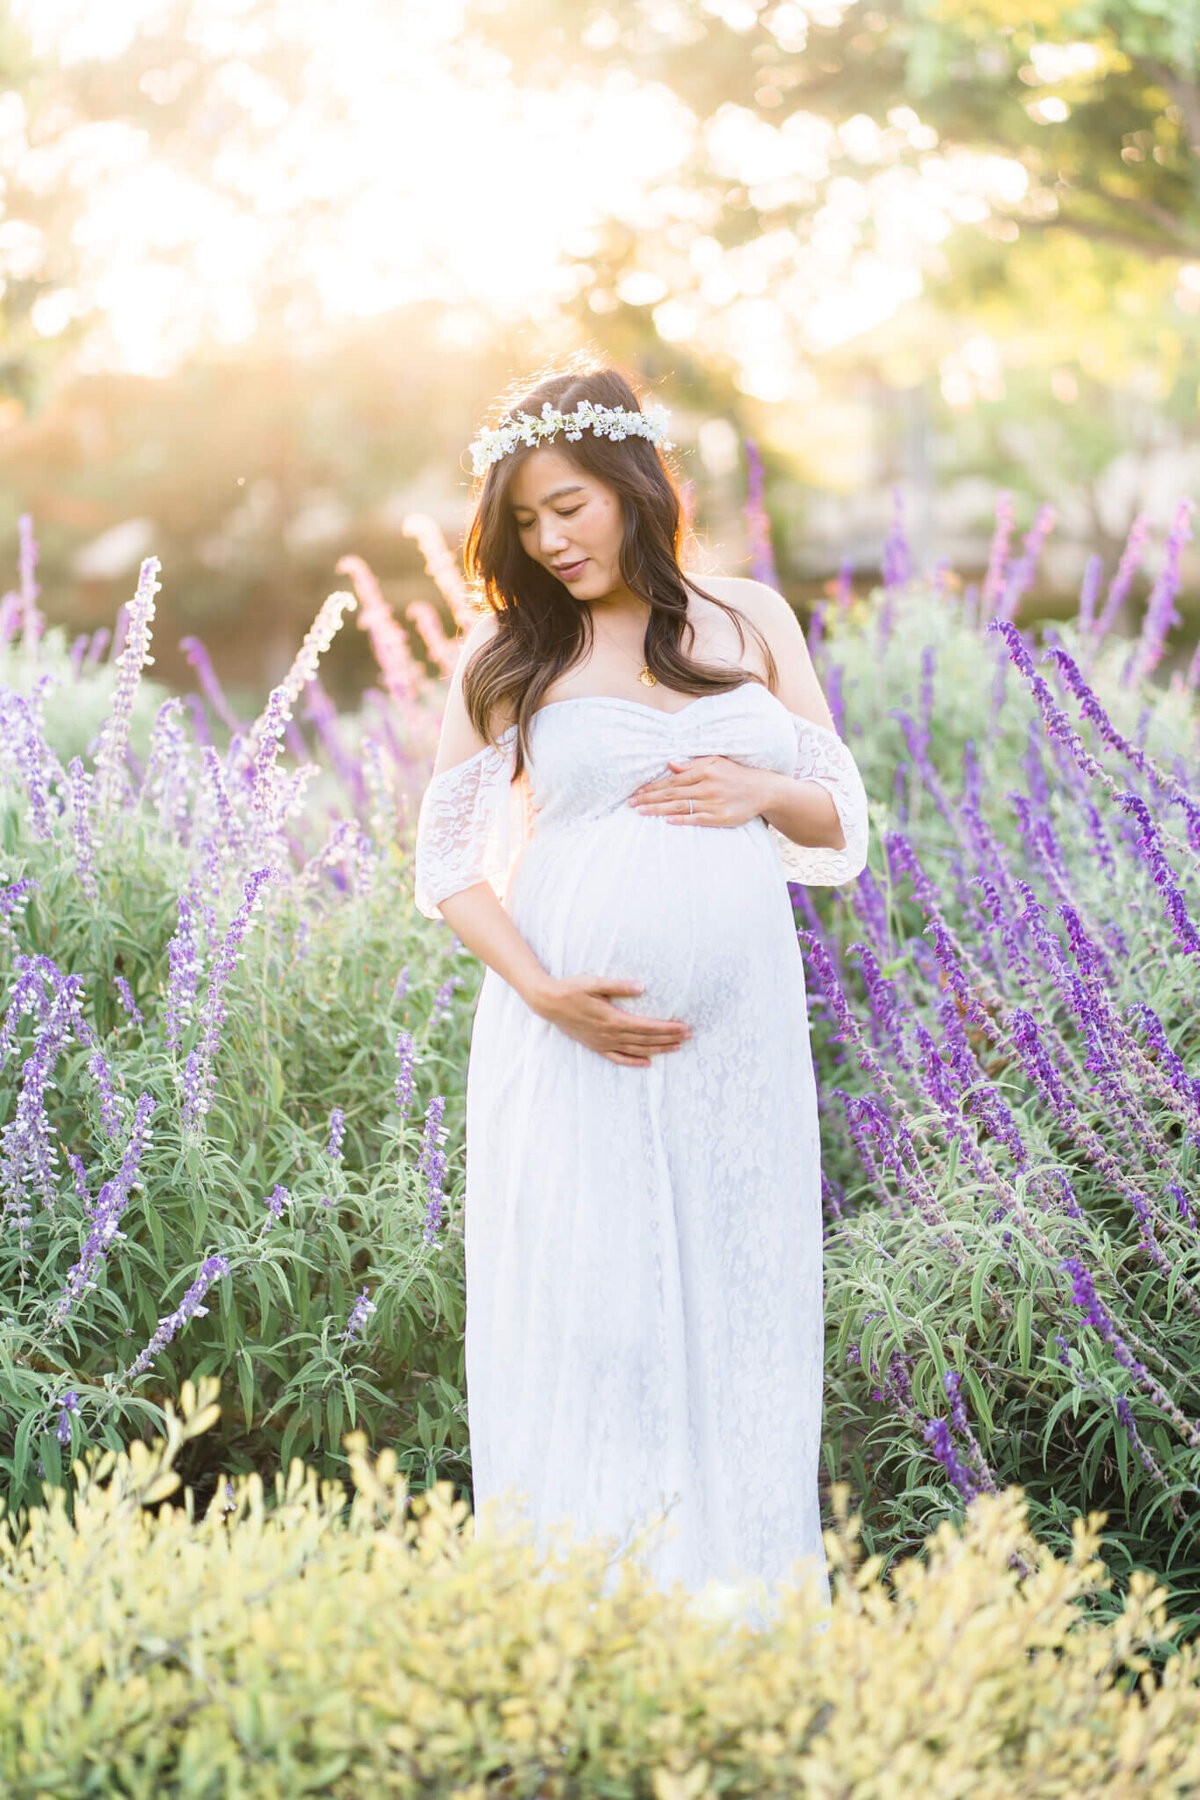 Pregnant mom in white dress holding her belly in purple field of flowers with sun in the background